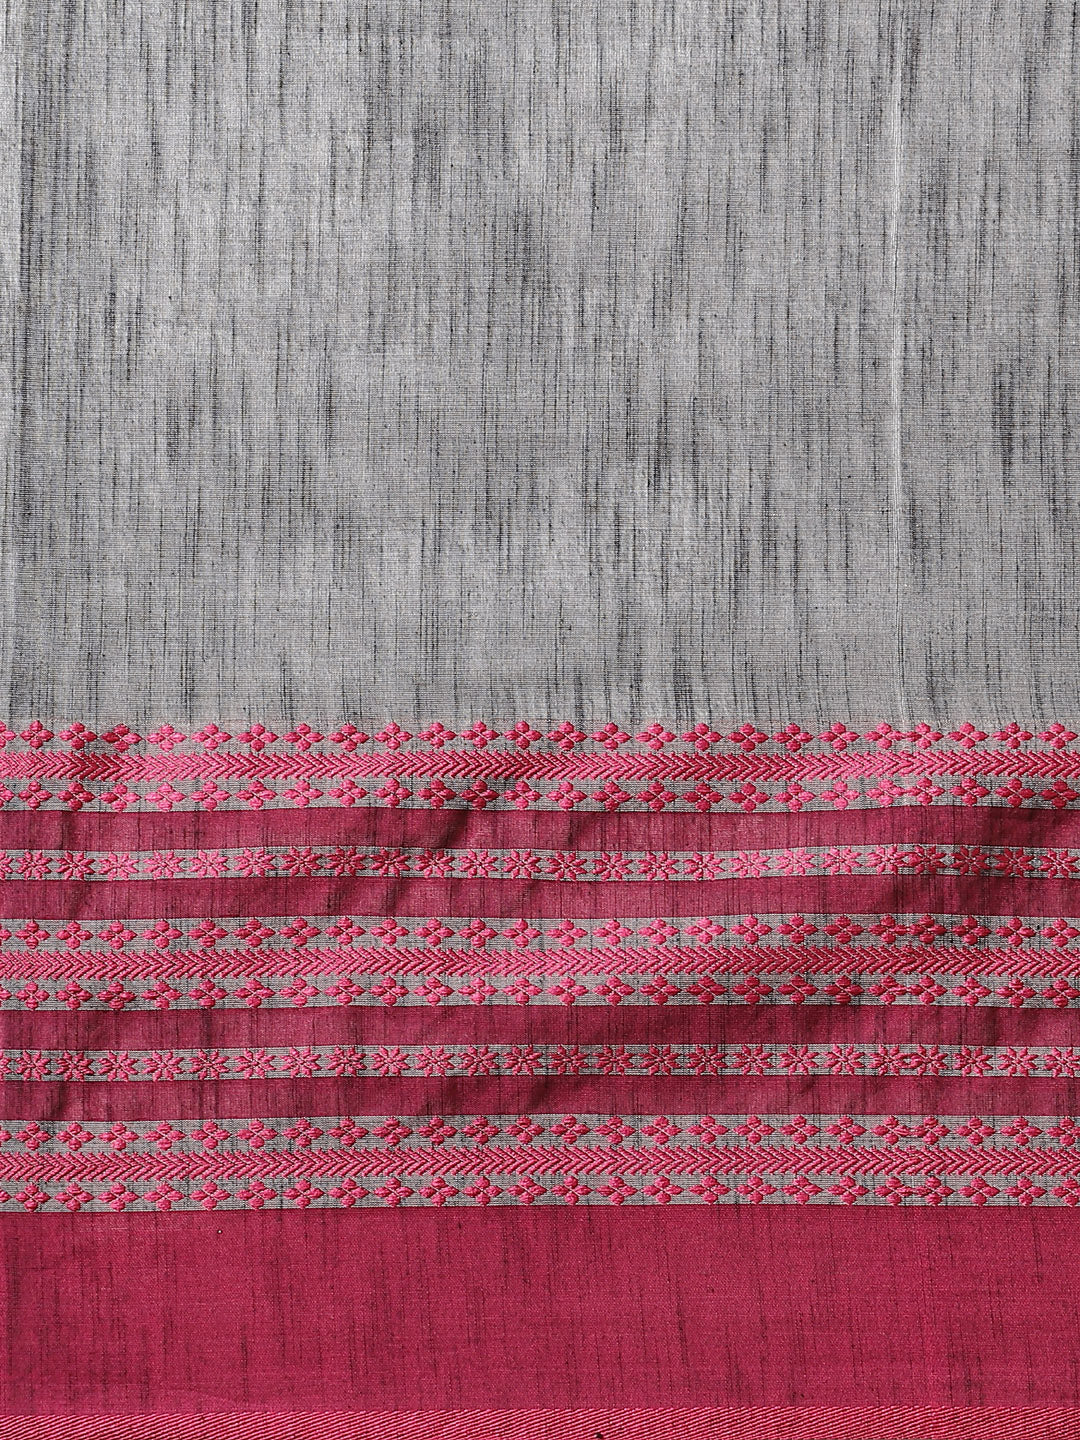 Grey and Pink, Kalakari India Cotton Grey Hand crafted saree with blouse SHBESA0010-Saree-Kalakari India-SHBESA0010-Begumpuri, Bengal, Cotton, Geographical Indication, Hand Crafted, Heritage Prints, Natural Dyes, Red, Sarees, Sustainable Fabrics, Woven, Yellow-[Linen,Ethnic,wear,Fashionista,Handloom,Handicraft,Indigo,blockprint,block,print,Cotton,Chanderi,Blue, latest,classy,party,bollywood,trendy,summer,style,traditional,formal,elegant,unique,style,hand,block,print, dabu,booti,gift,present,glam